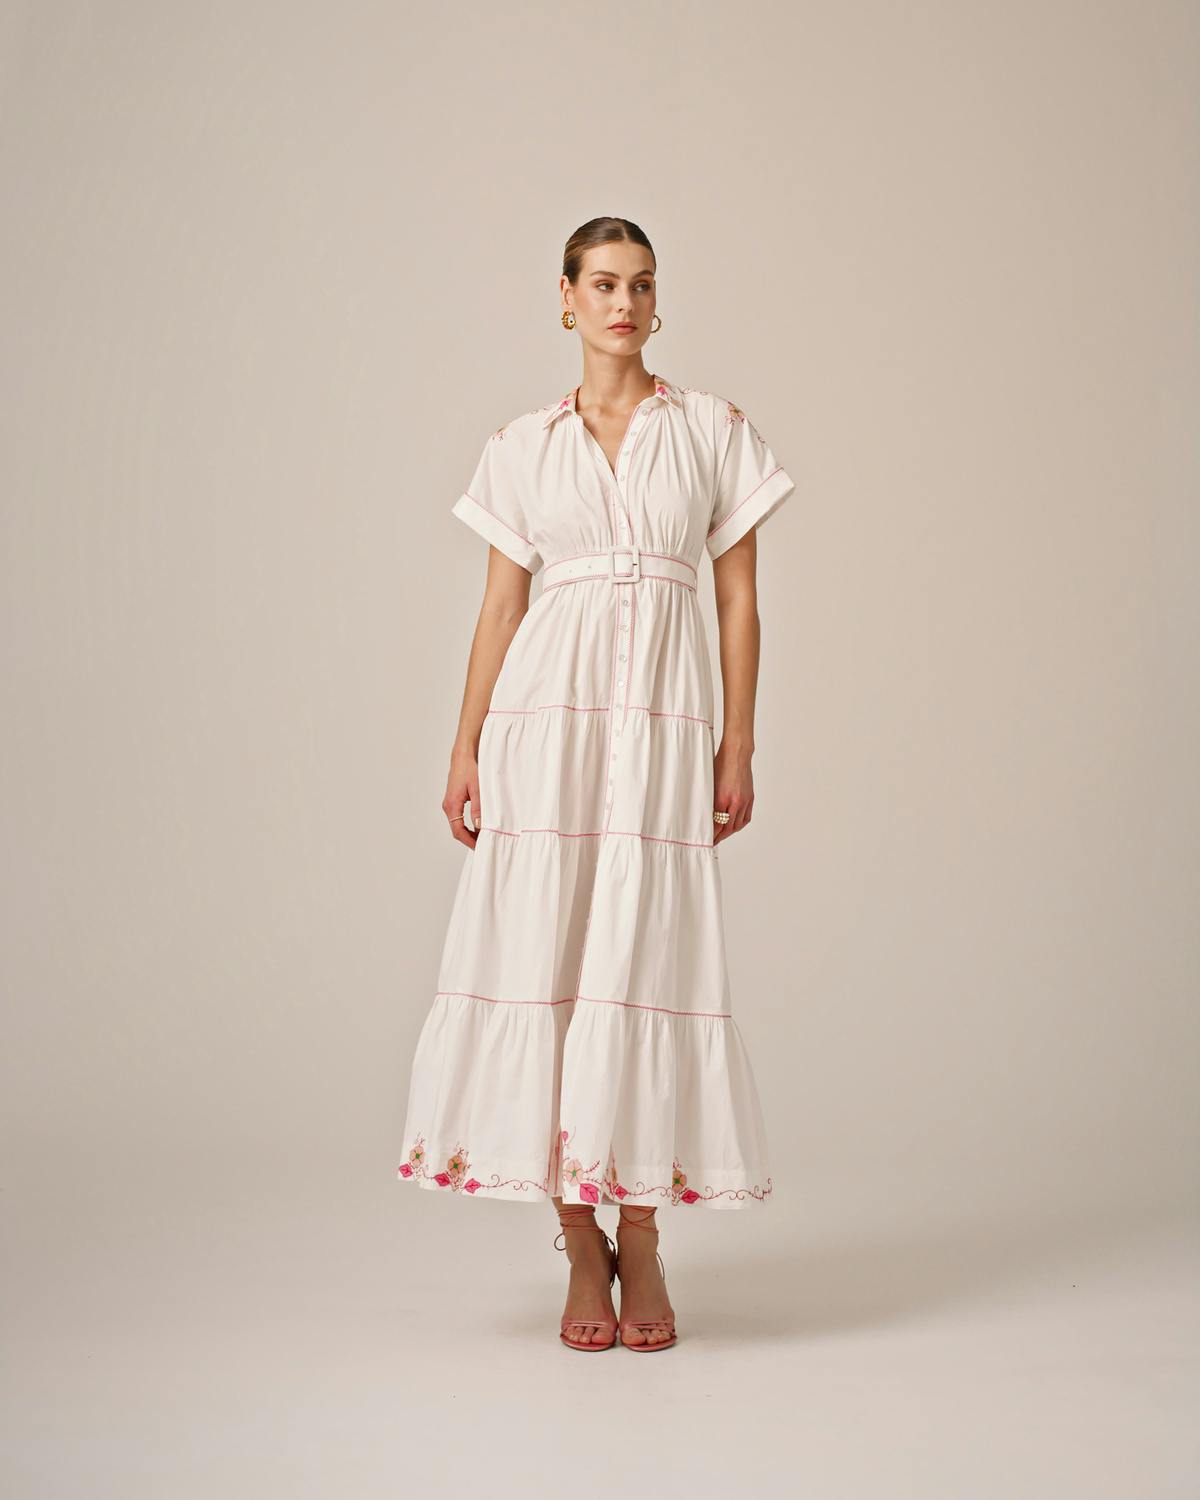 Poplin Embroidered Shirt Dress, White With Embroidery. Image #3